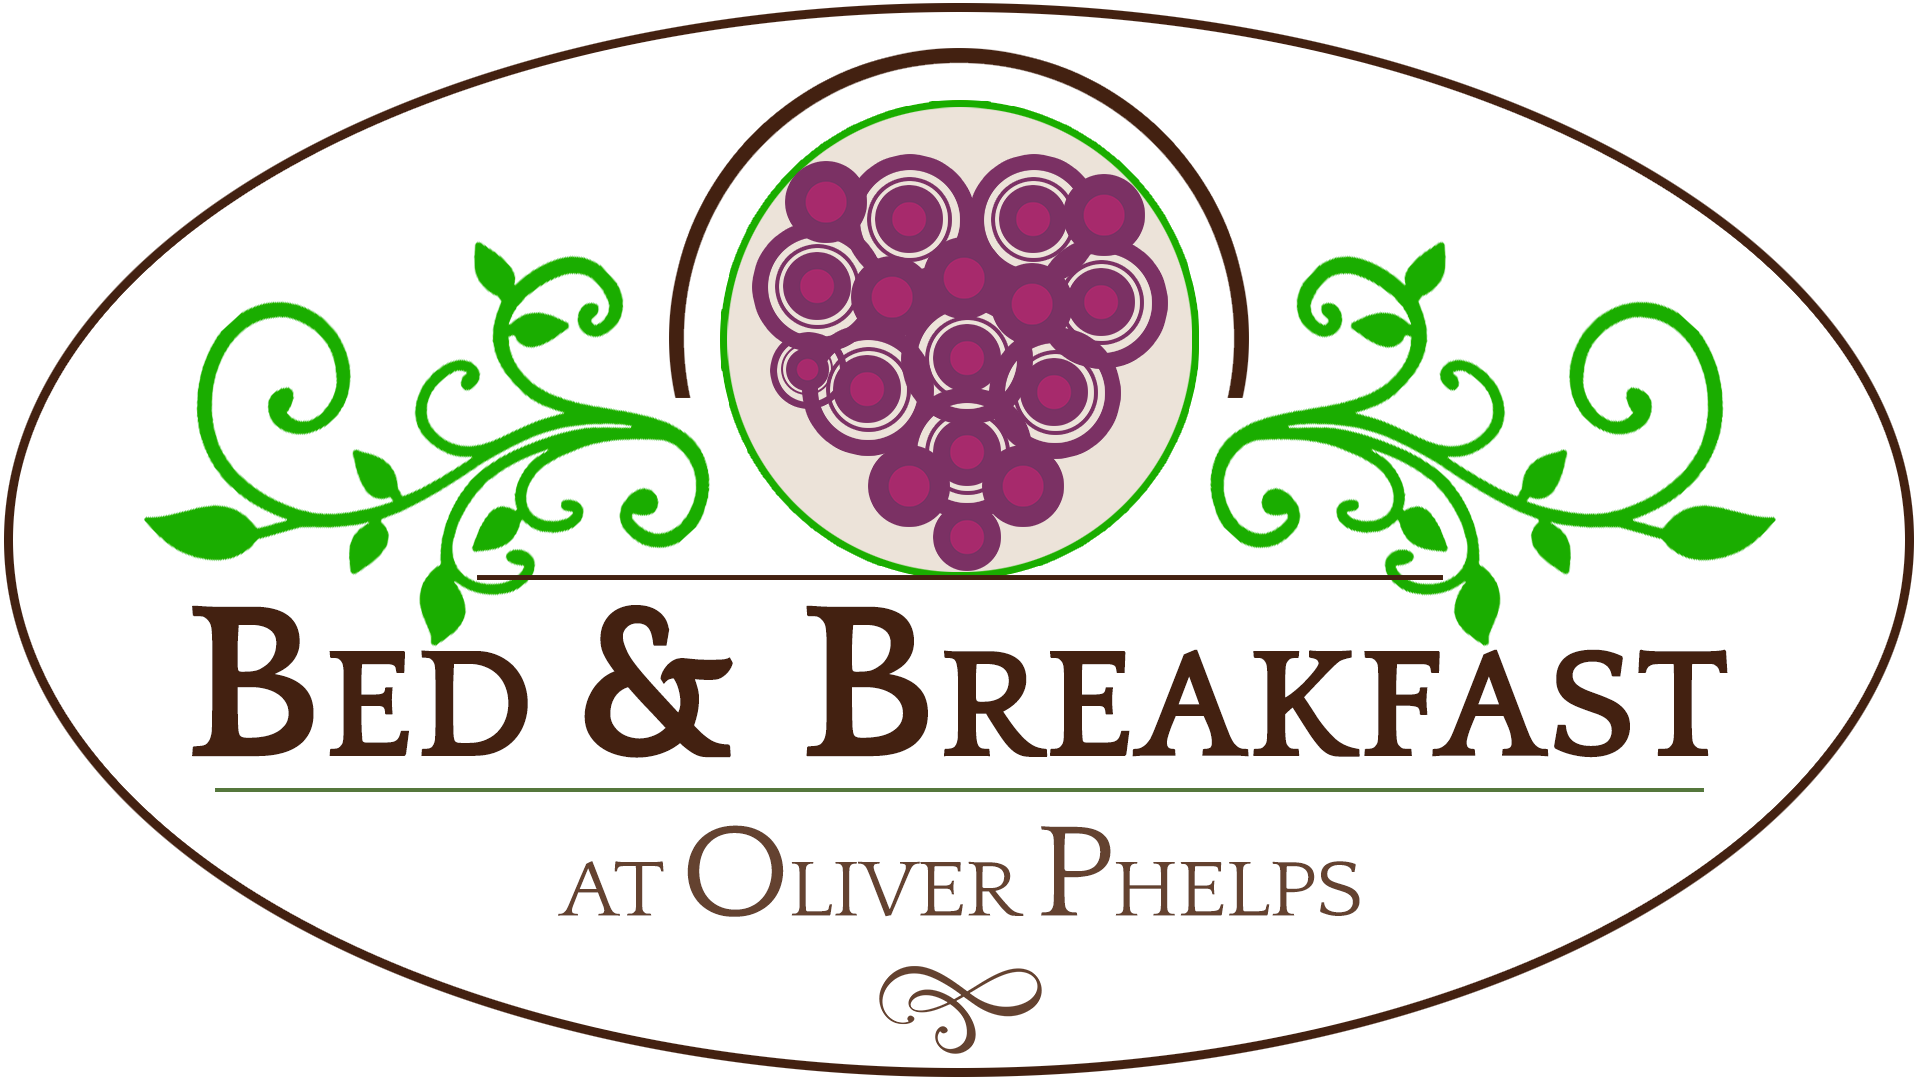 Bed & Breakfast at Oliver Phelps